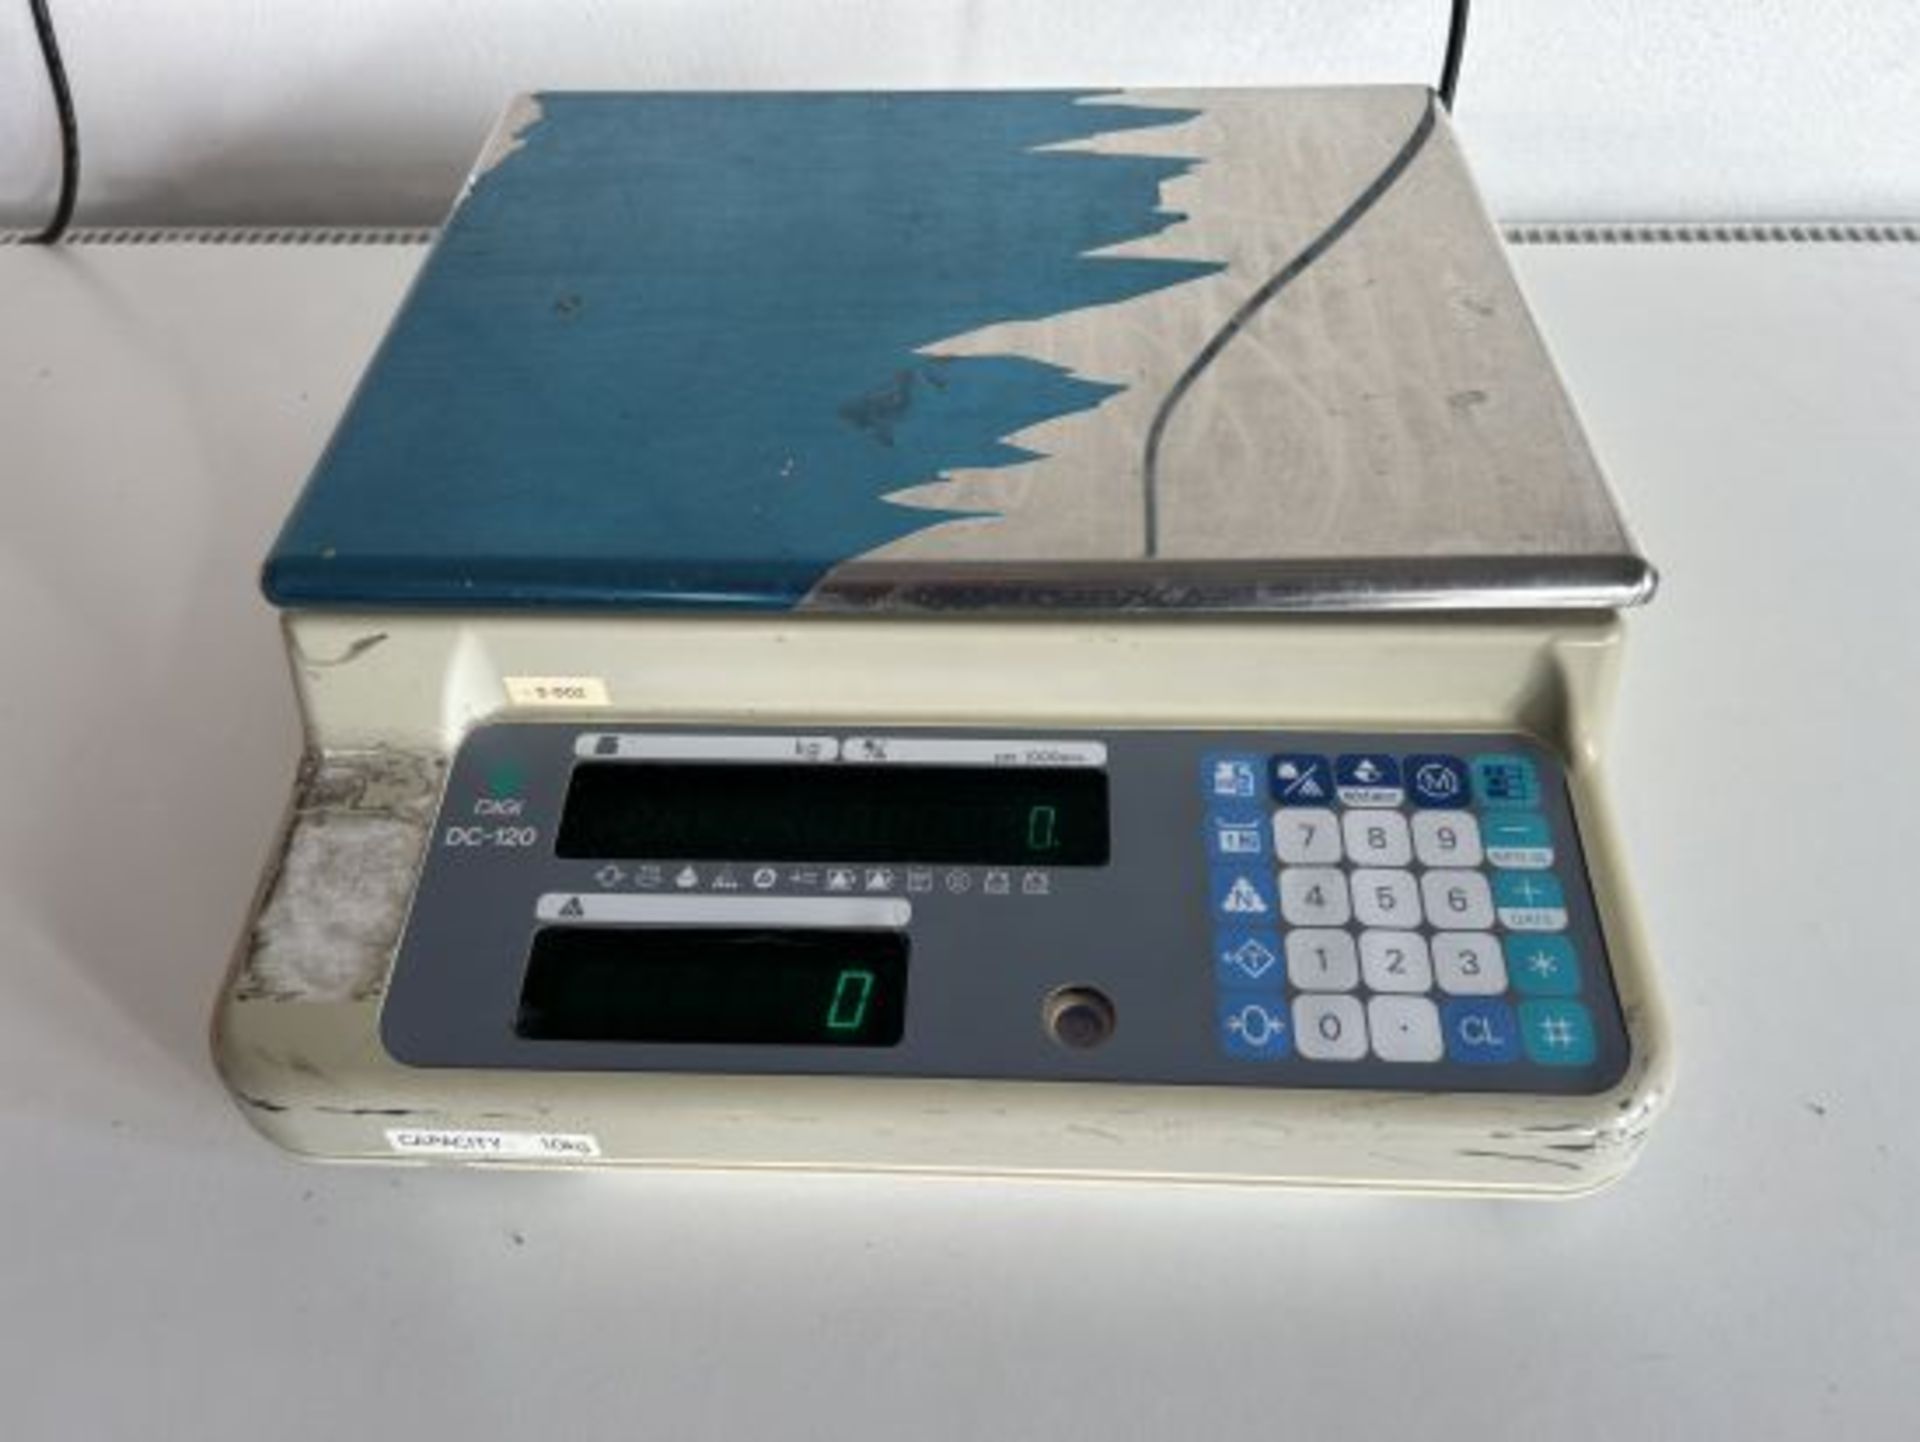 Digi DC-120 Benchtop Weighing Scales, Max Capacity 10Kgs, Single Phase.